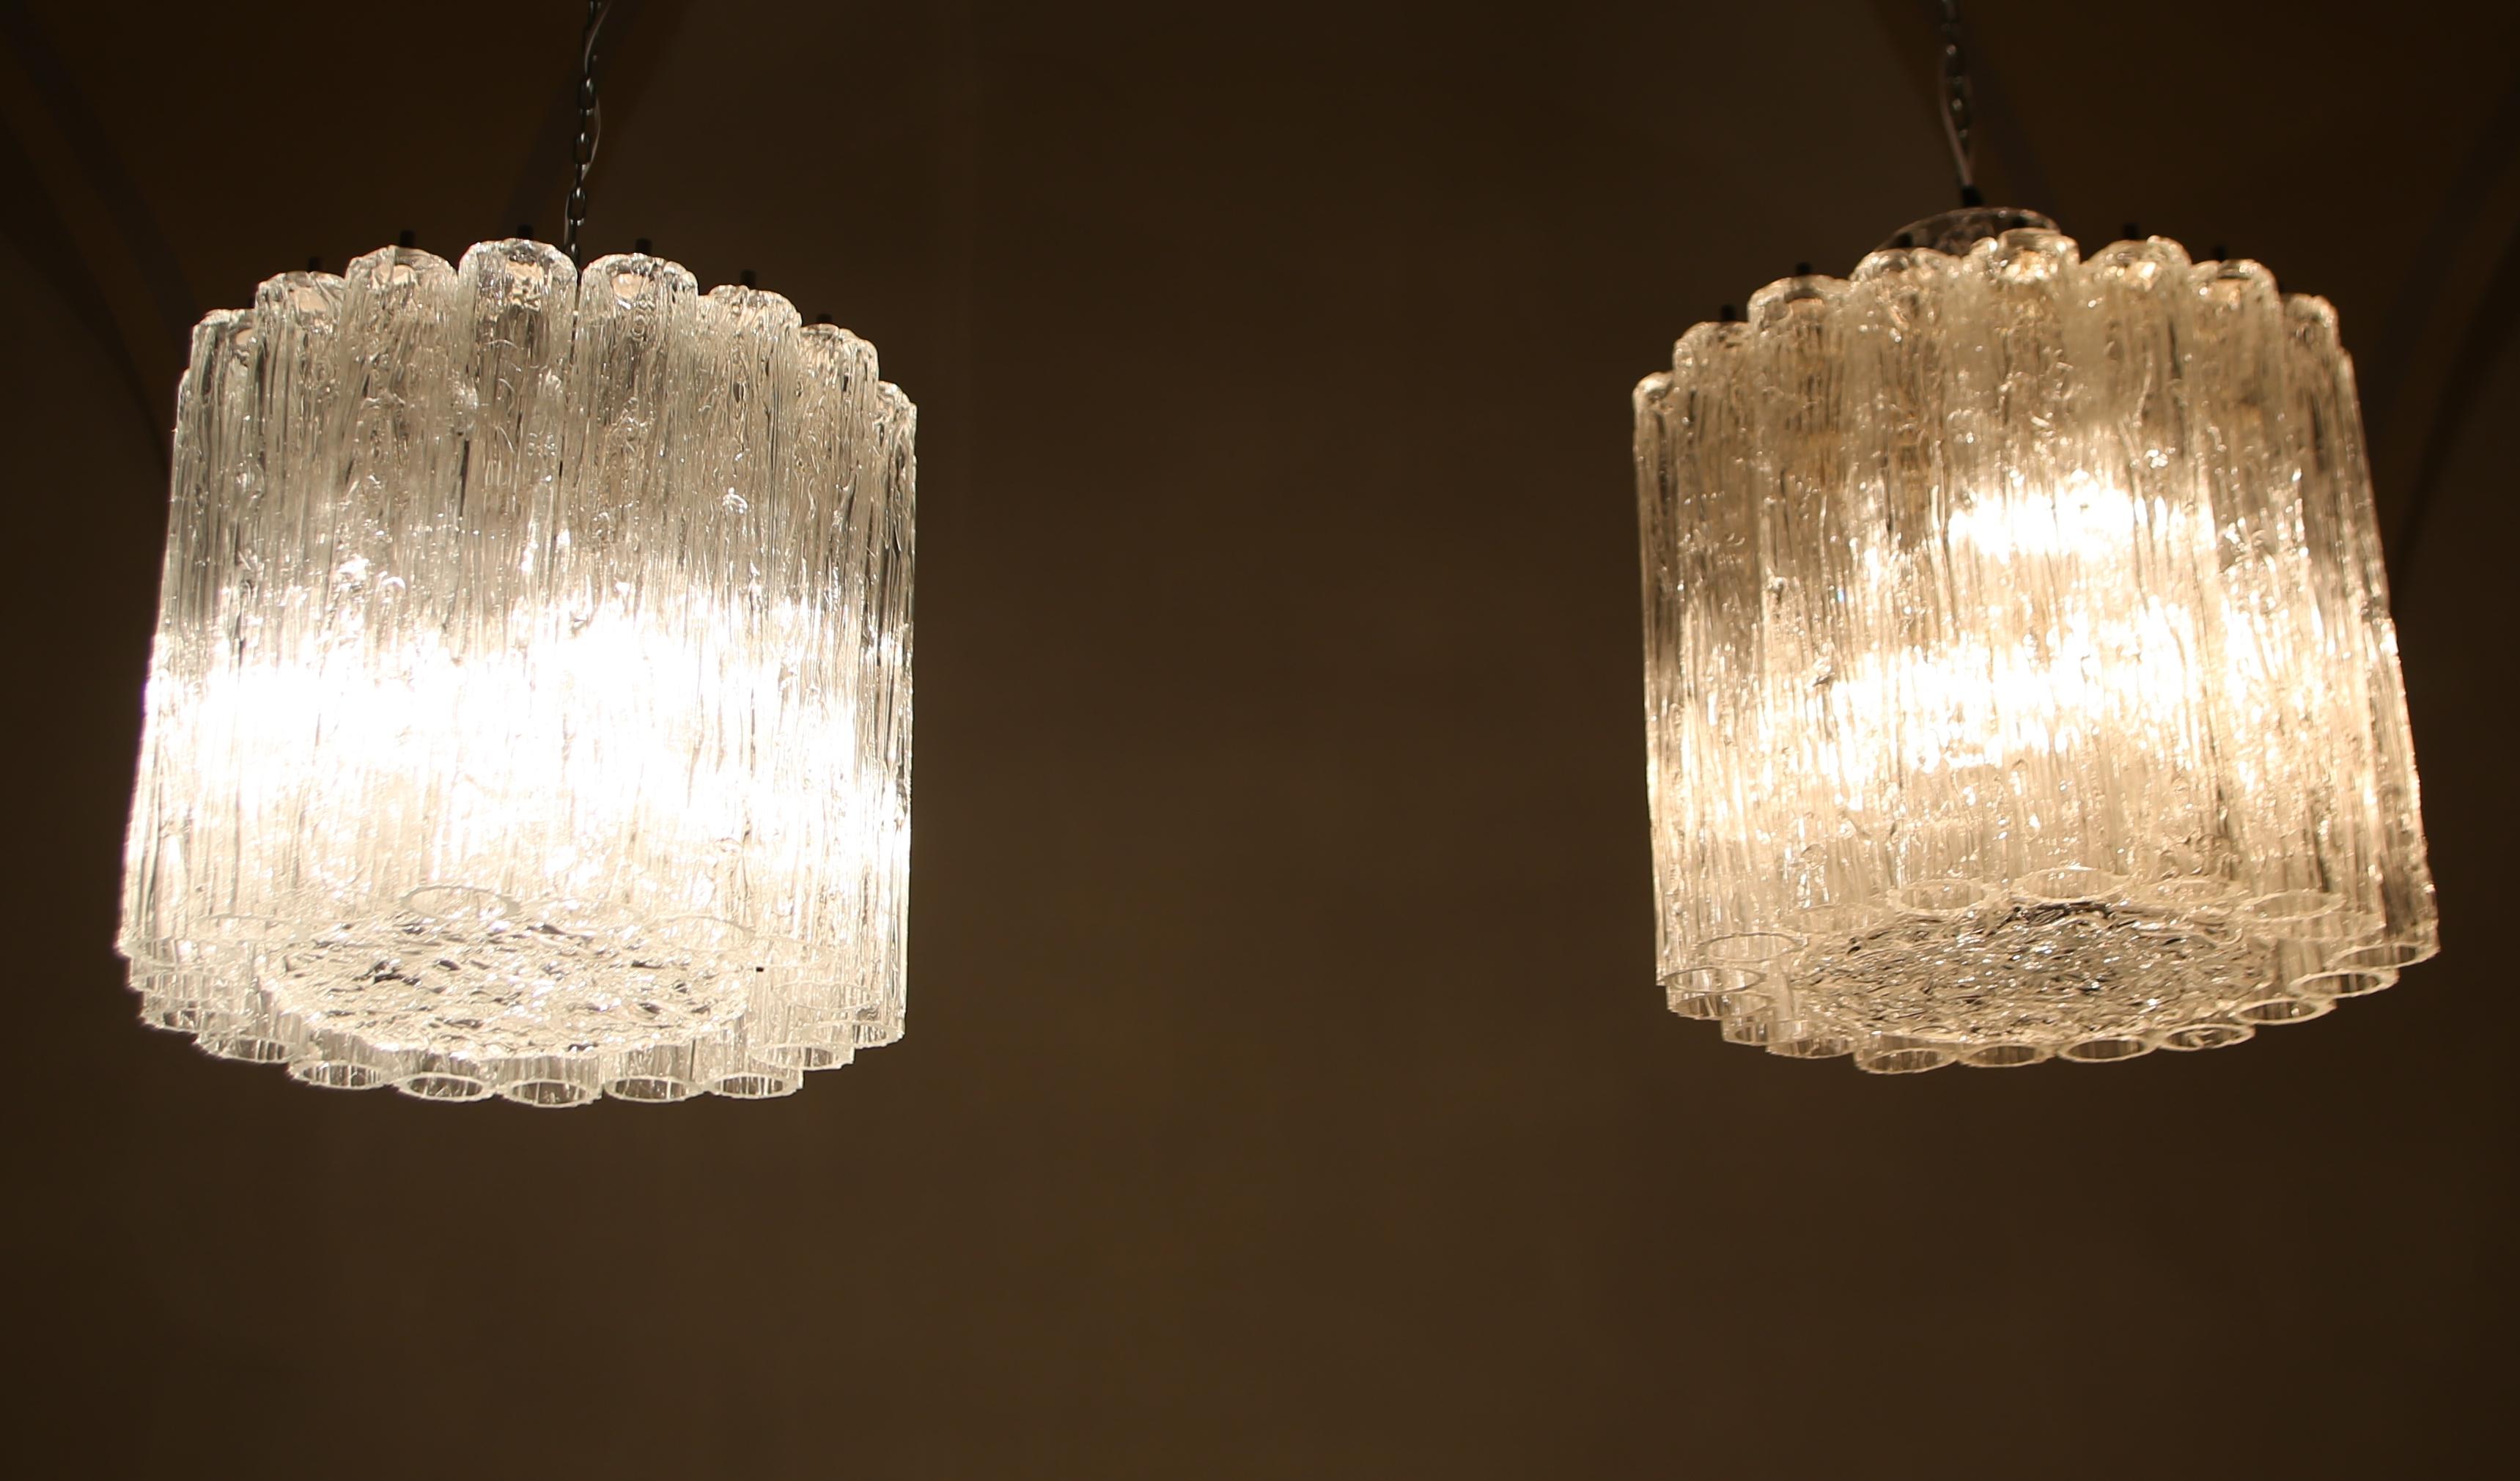 TONI SUGAR.
Pair of glass and brass chandeliers from the 